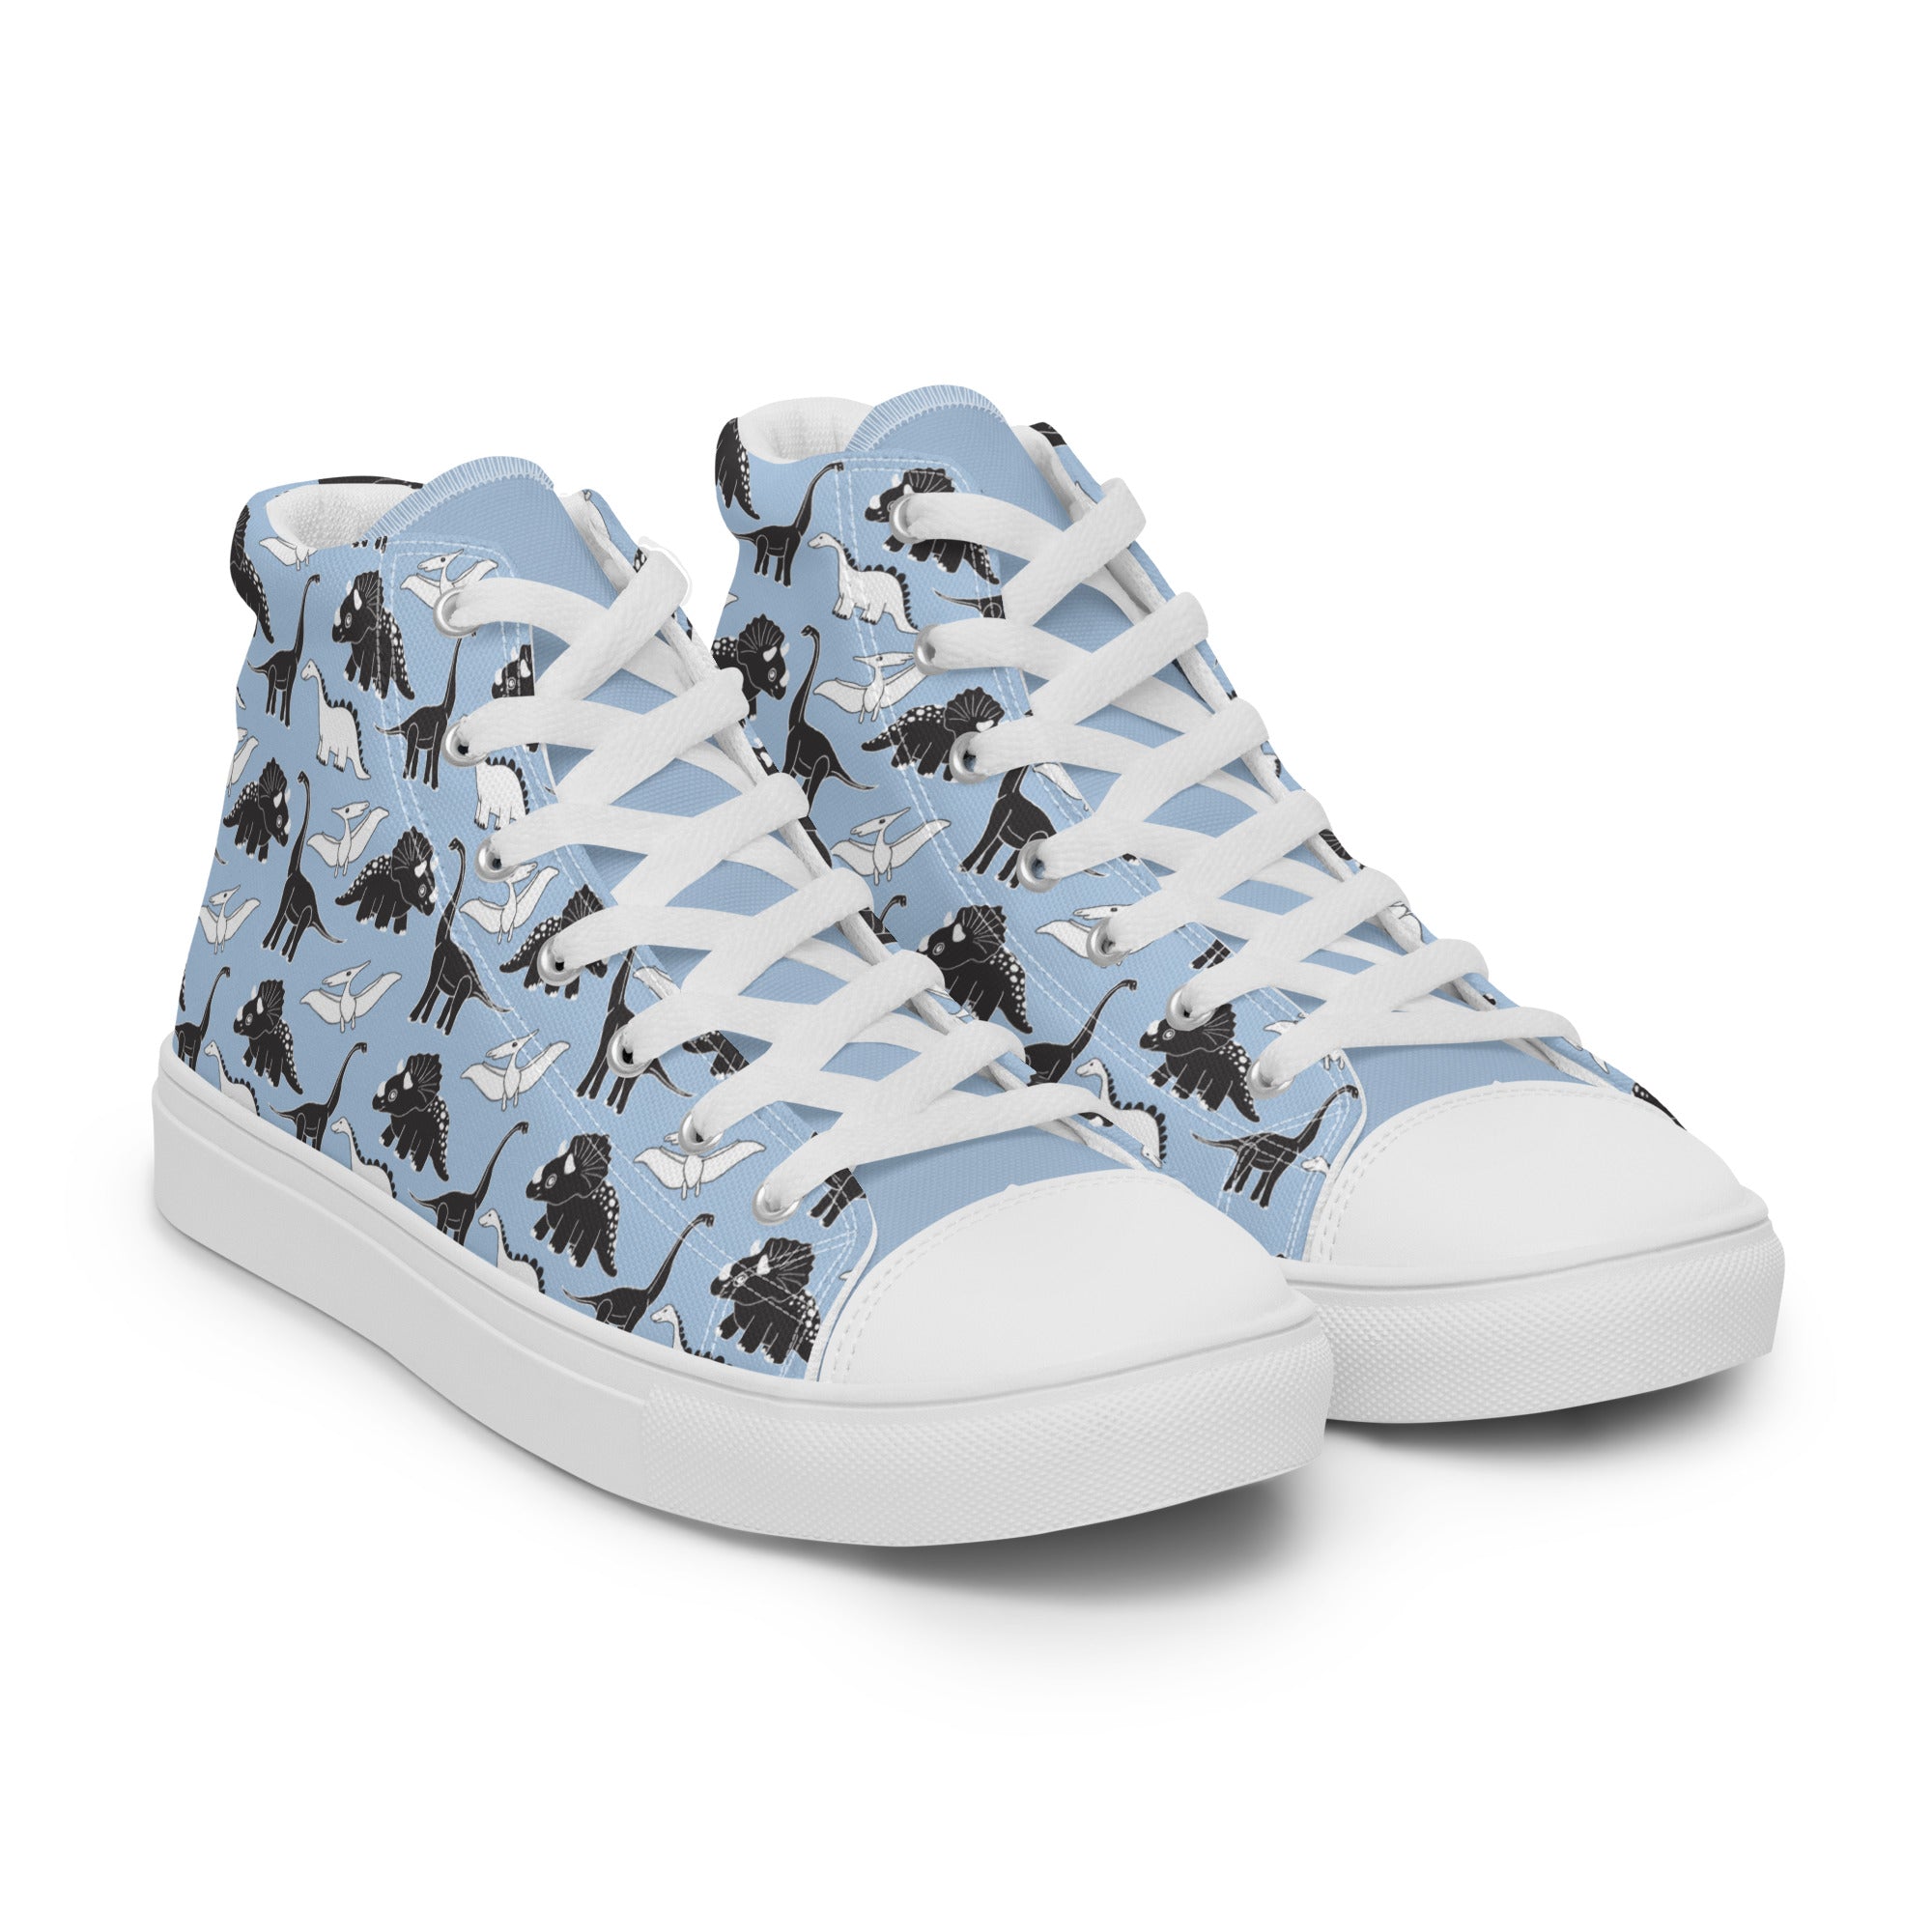 Chitelli's Dino Delight Women's High Top Shoes